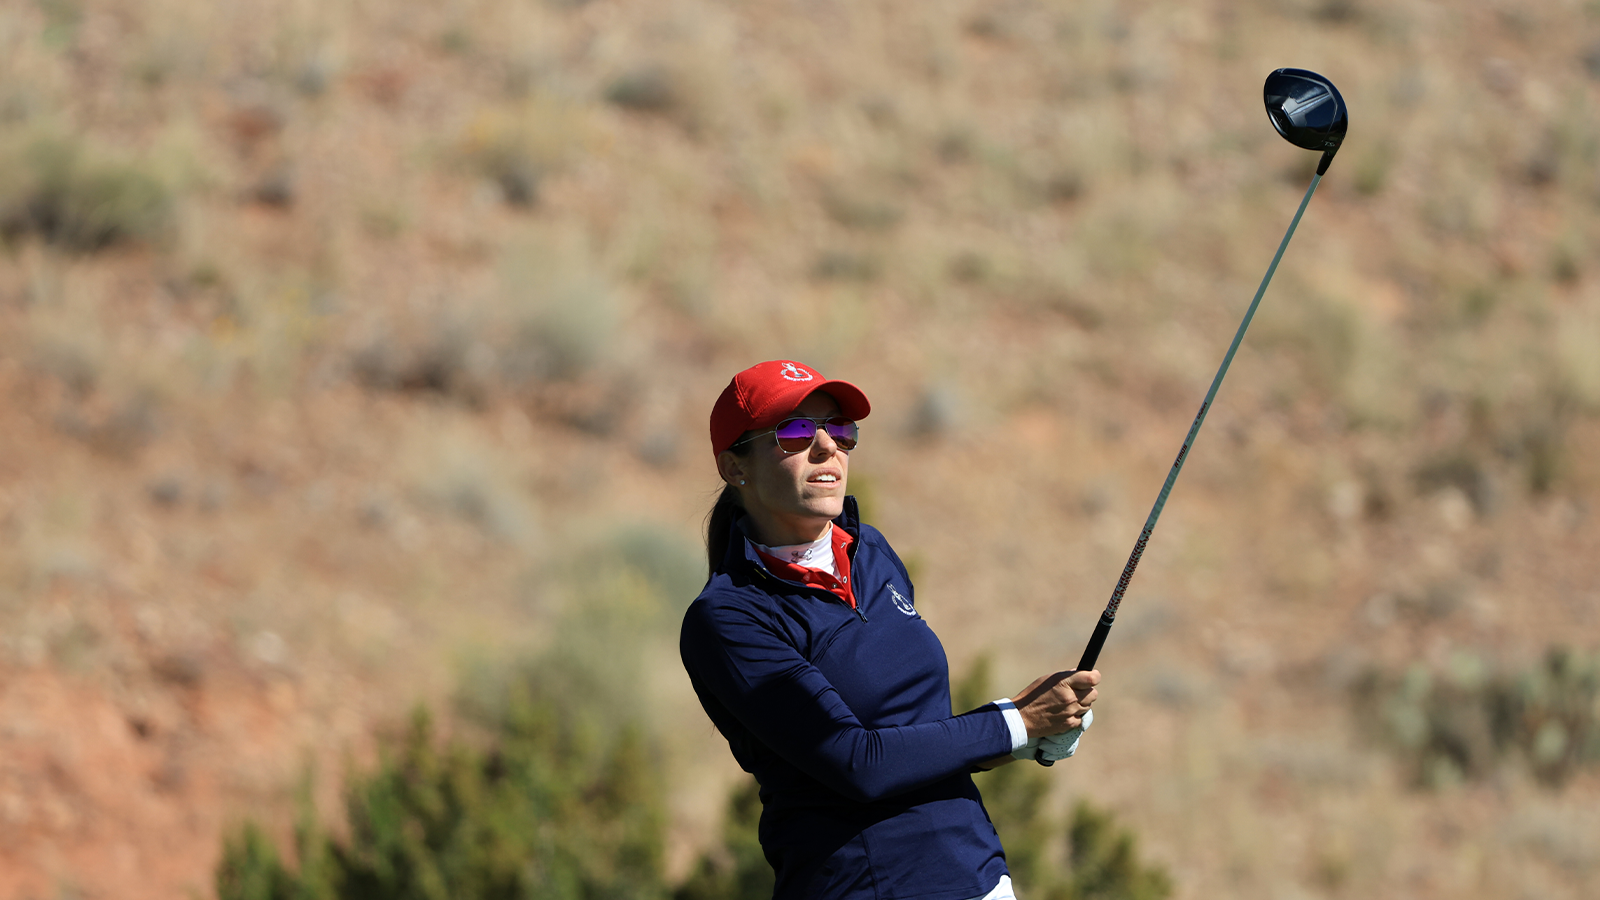 Joanna Coe of the U.S Team hits her tee shot on the seventh hole during the final round of the 2nd Women's PGA Cup at Twin Warriors Golf Club on Saturday, October 29, 2022 in Santa Ana Pueblo, New Mexico. (Photo by Sam Greenwood/PGA of America)